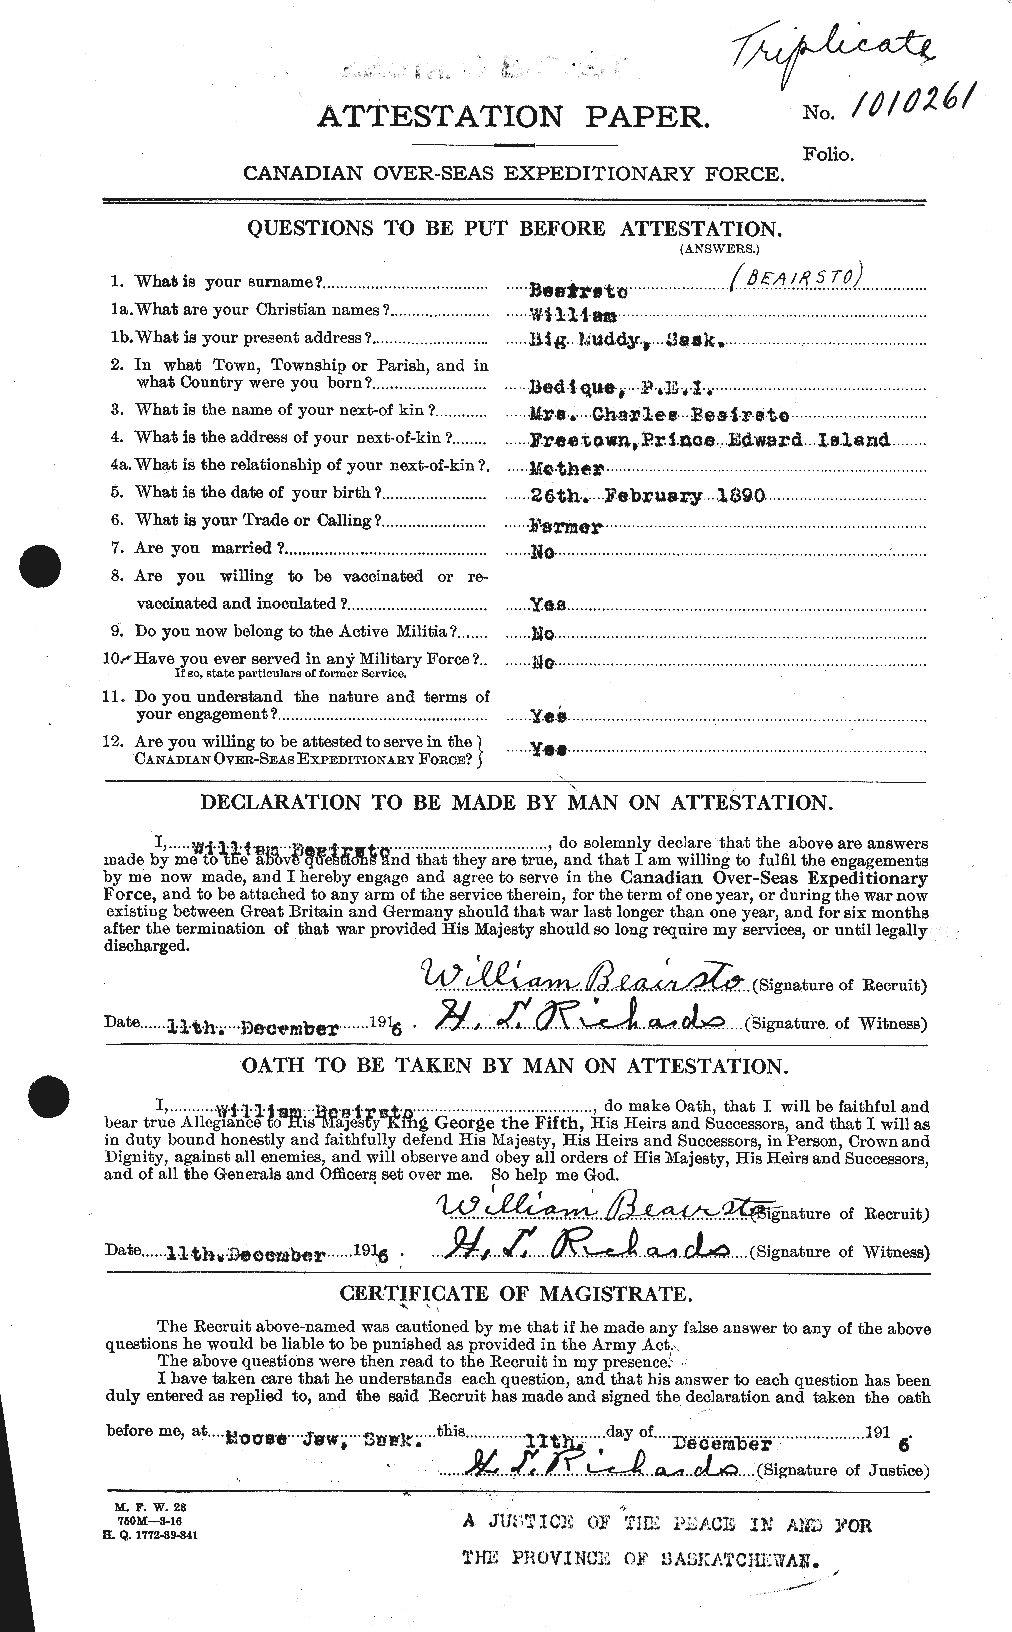 Personnel Records of the First World War - CEF 235259a